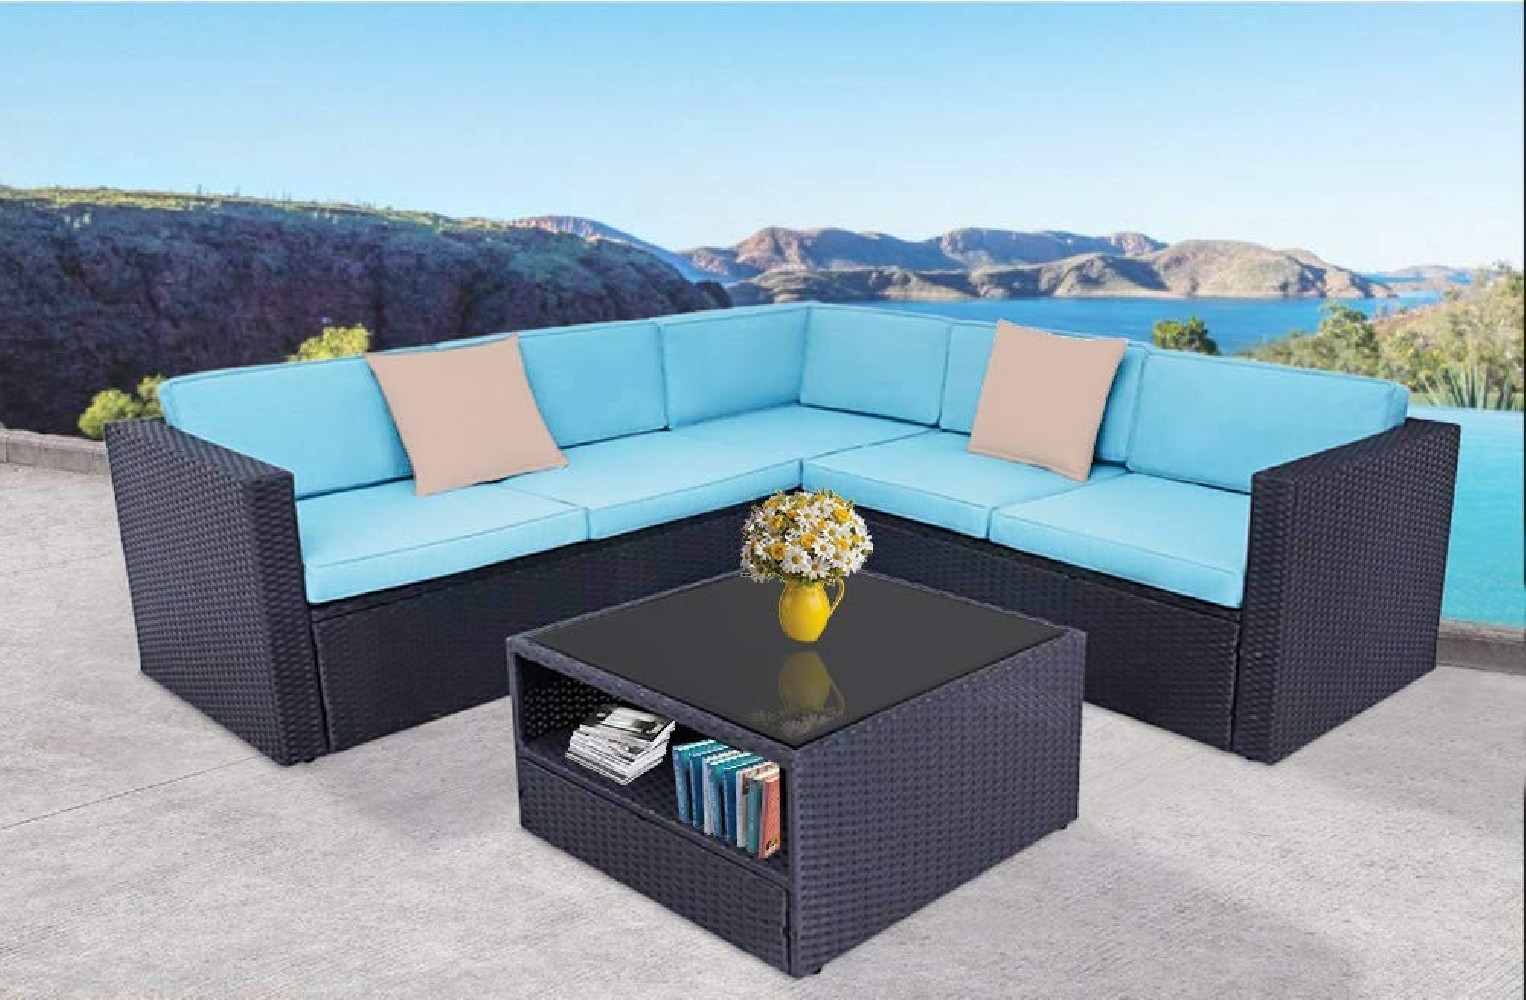 Oakmont Outdoor Patio Furniture 4Pcs Conversation Sectional Sofa with Premium Wicker, Sturdy Frame, Thick Sky Blue Cushions a